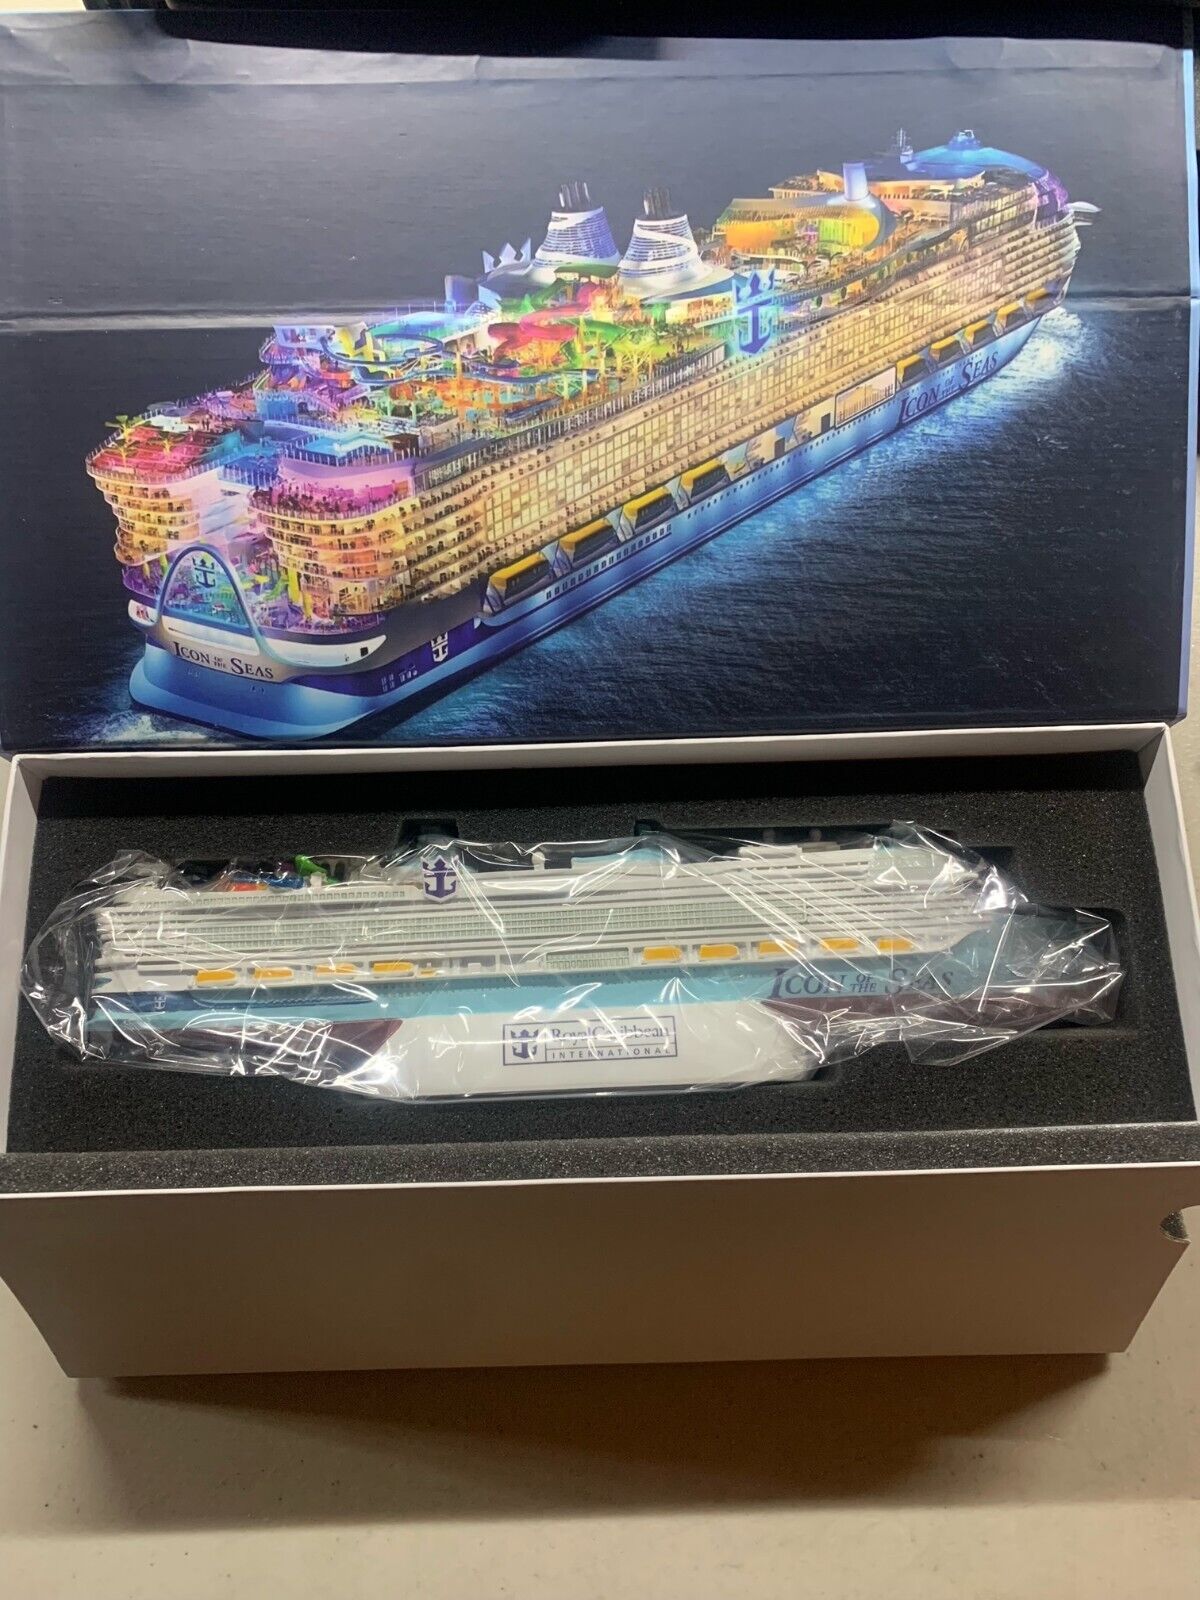 New In Box Icon Of the Seas Official Licensed Ship Model Royal Caribbean